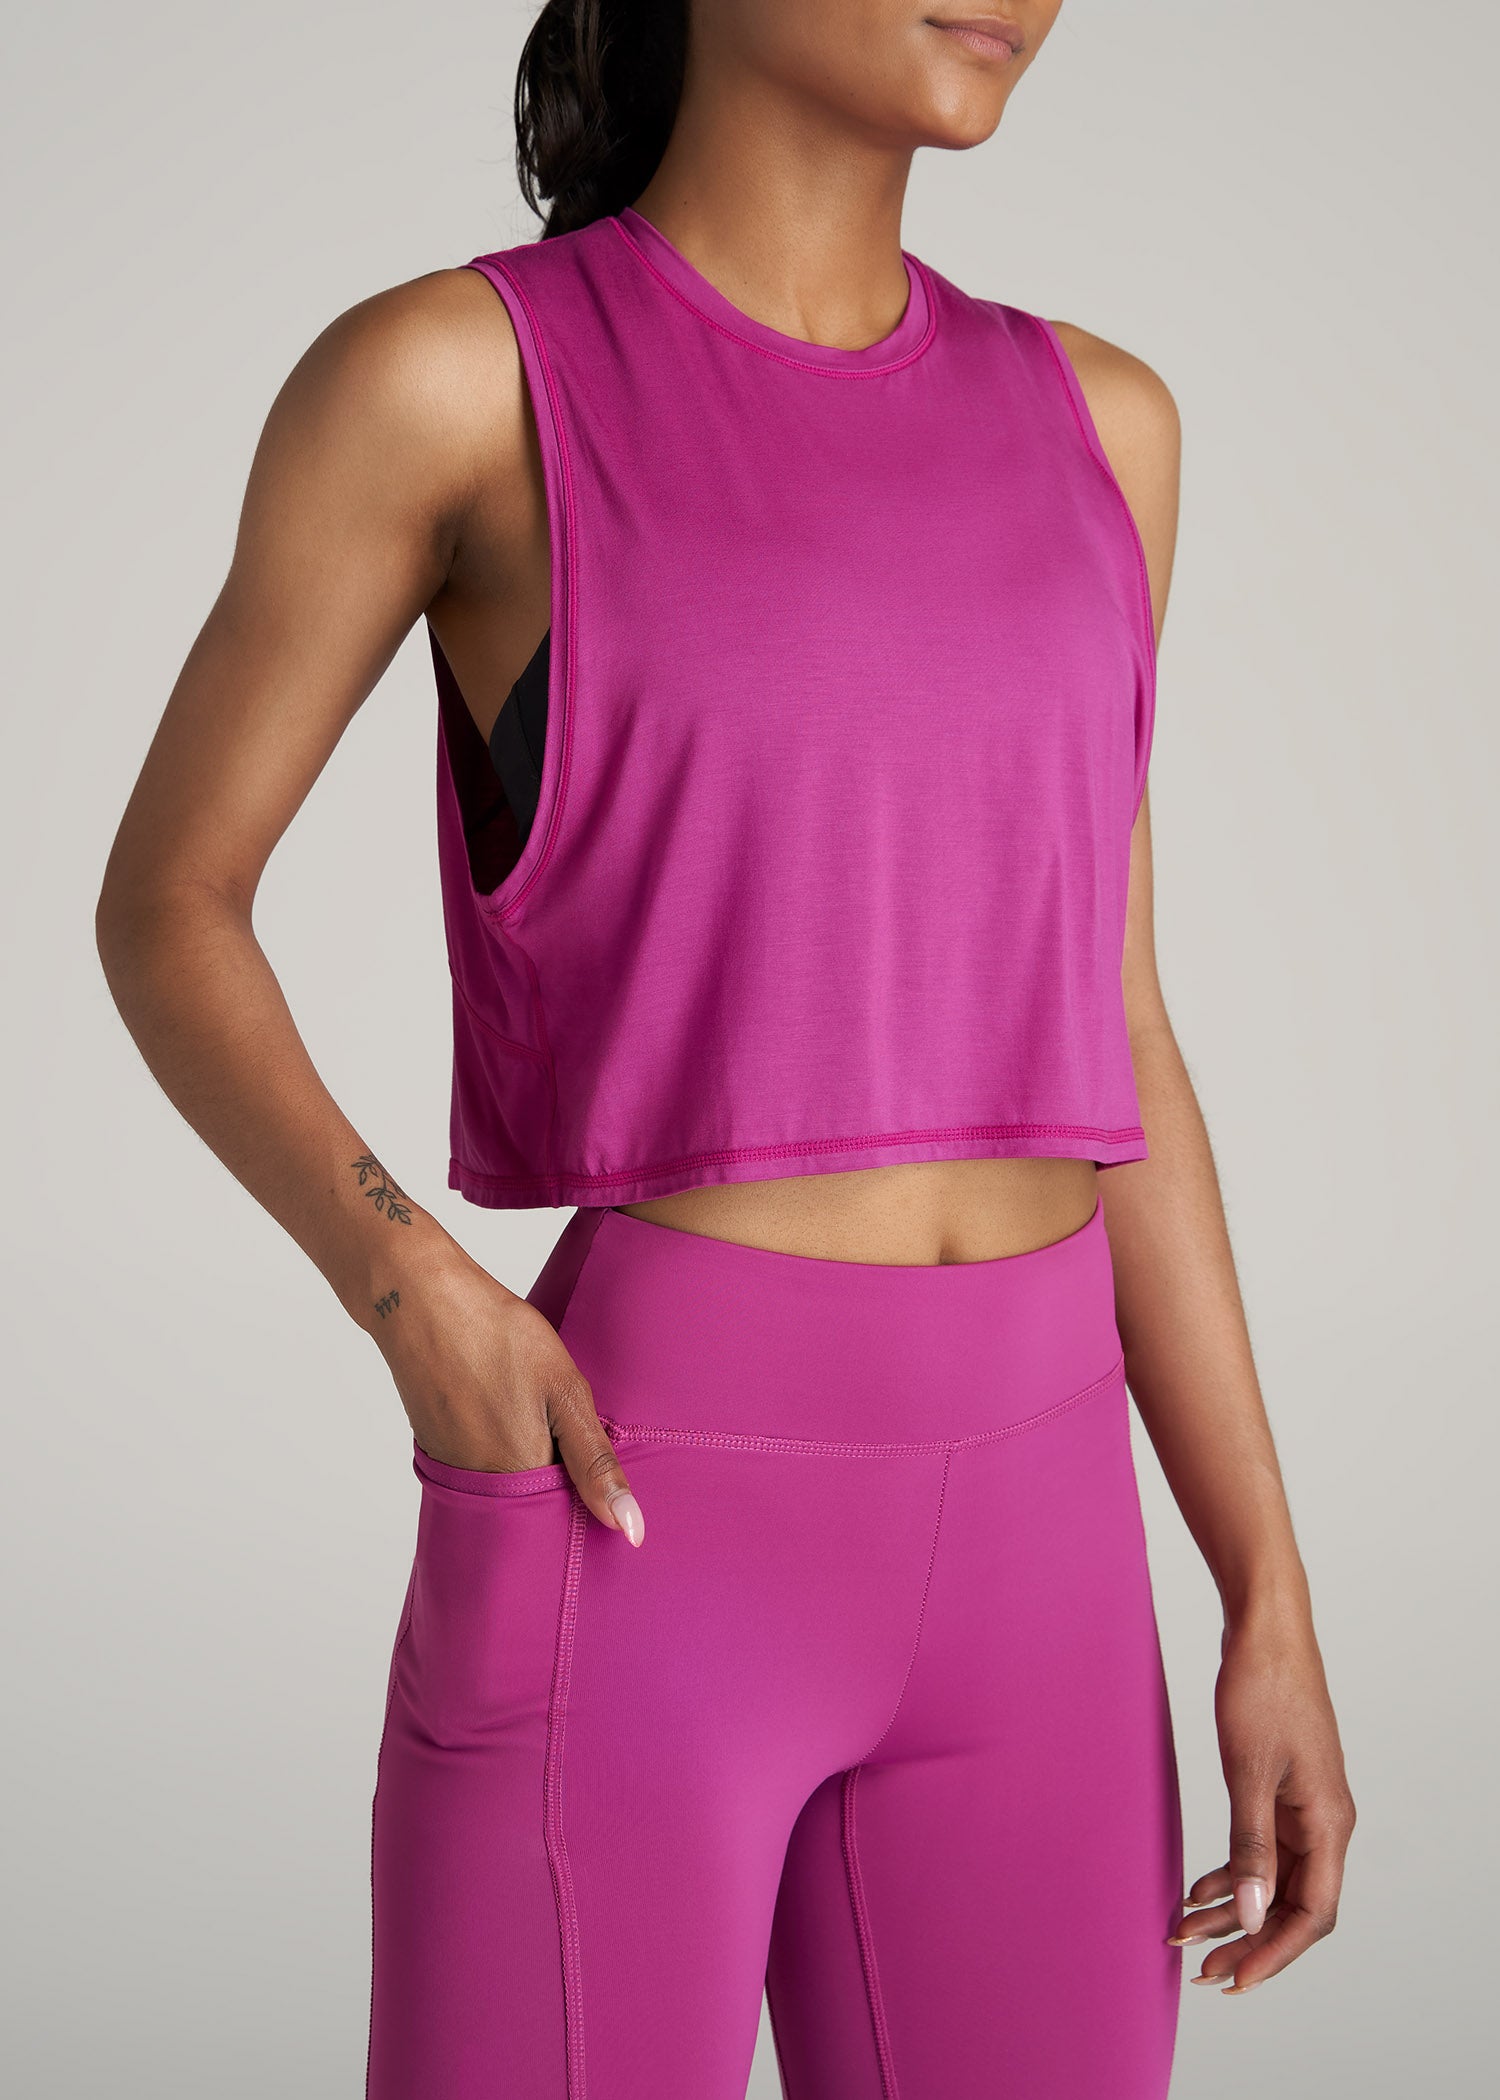 A tall woman wearing American Tall's Cropped Muscle Tank top in the color Pink Orchid and matching leggings.